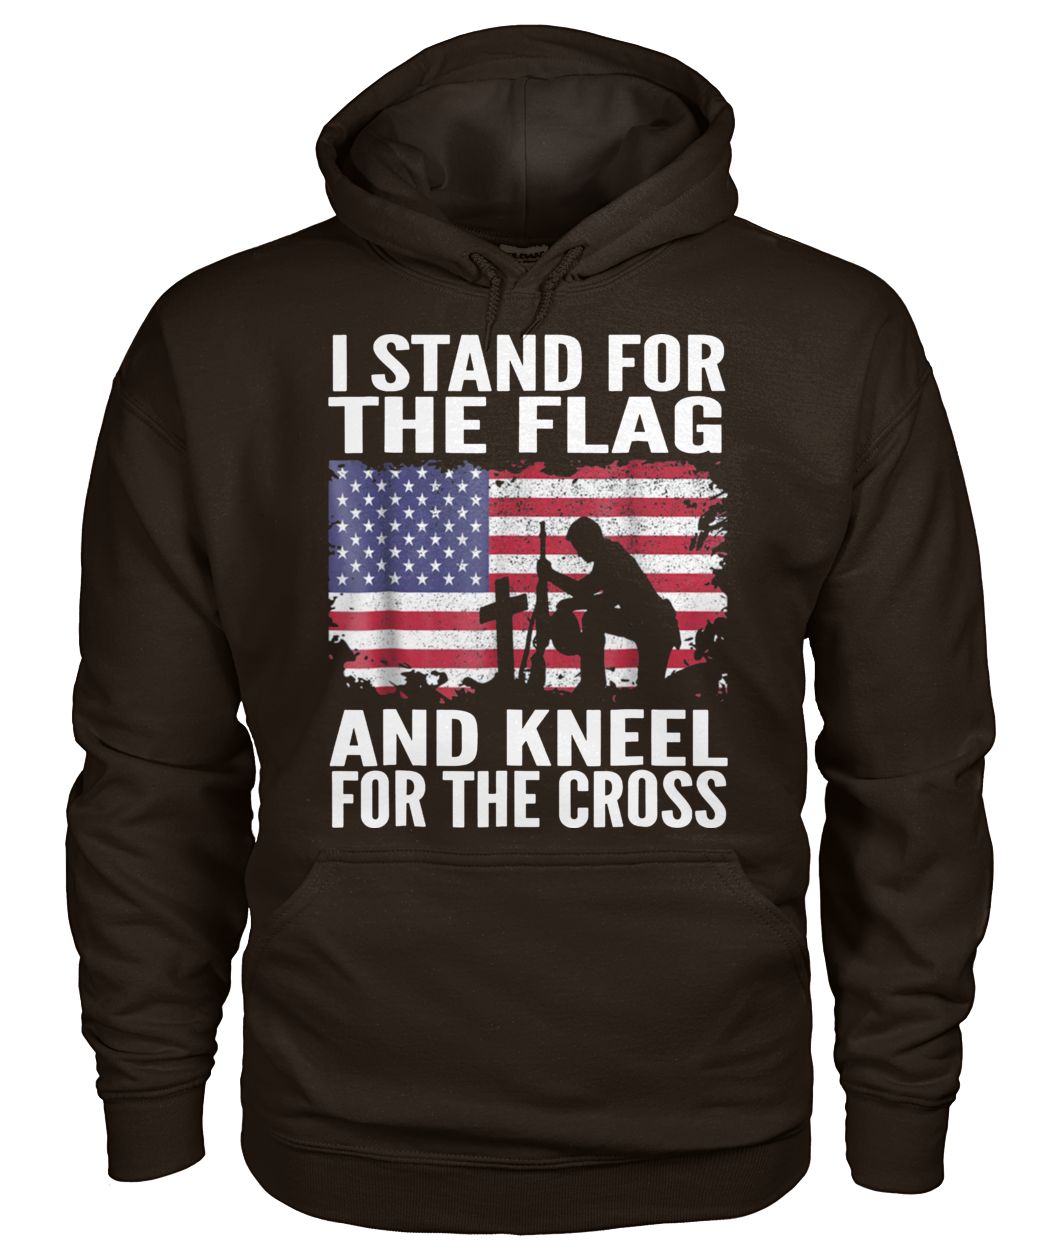 I stand for the flag I kneel for the cross patriotic military gildan hoodie